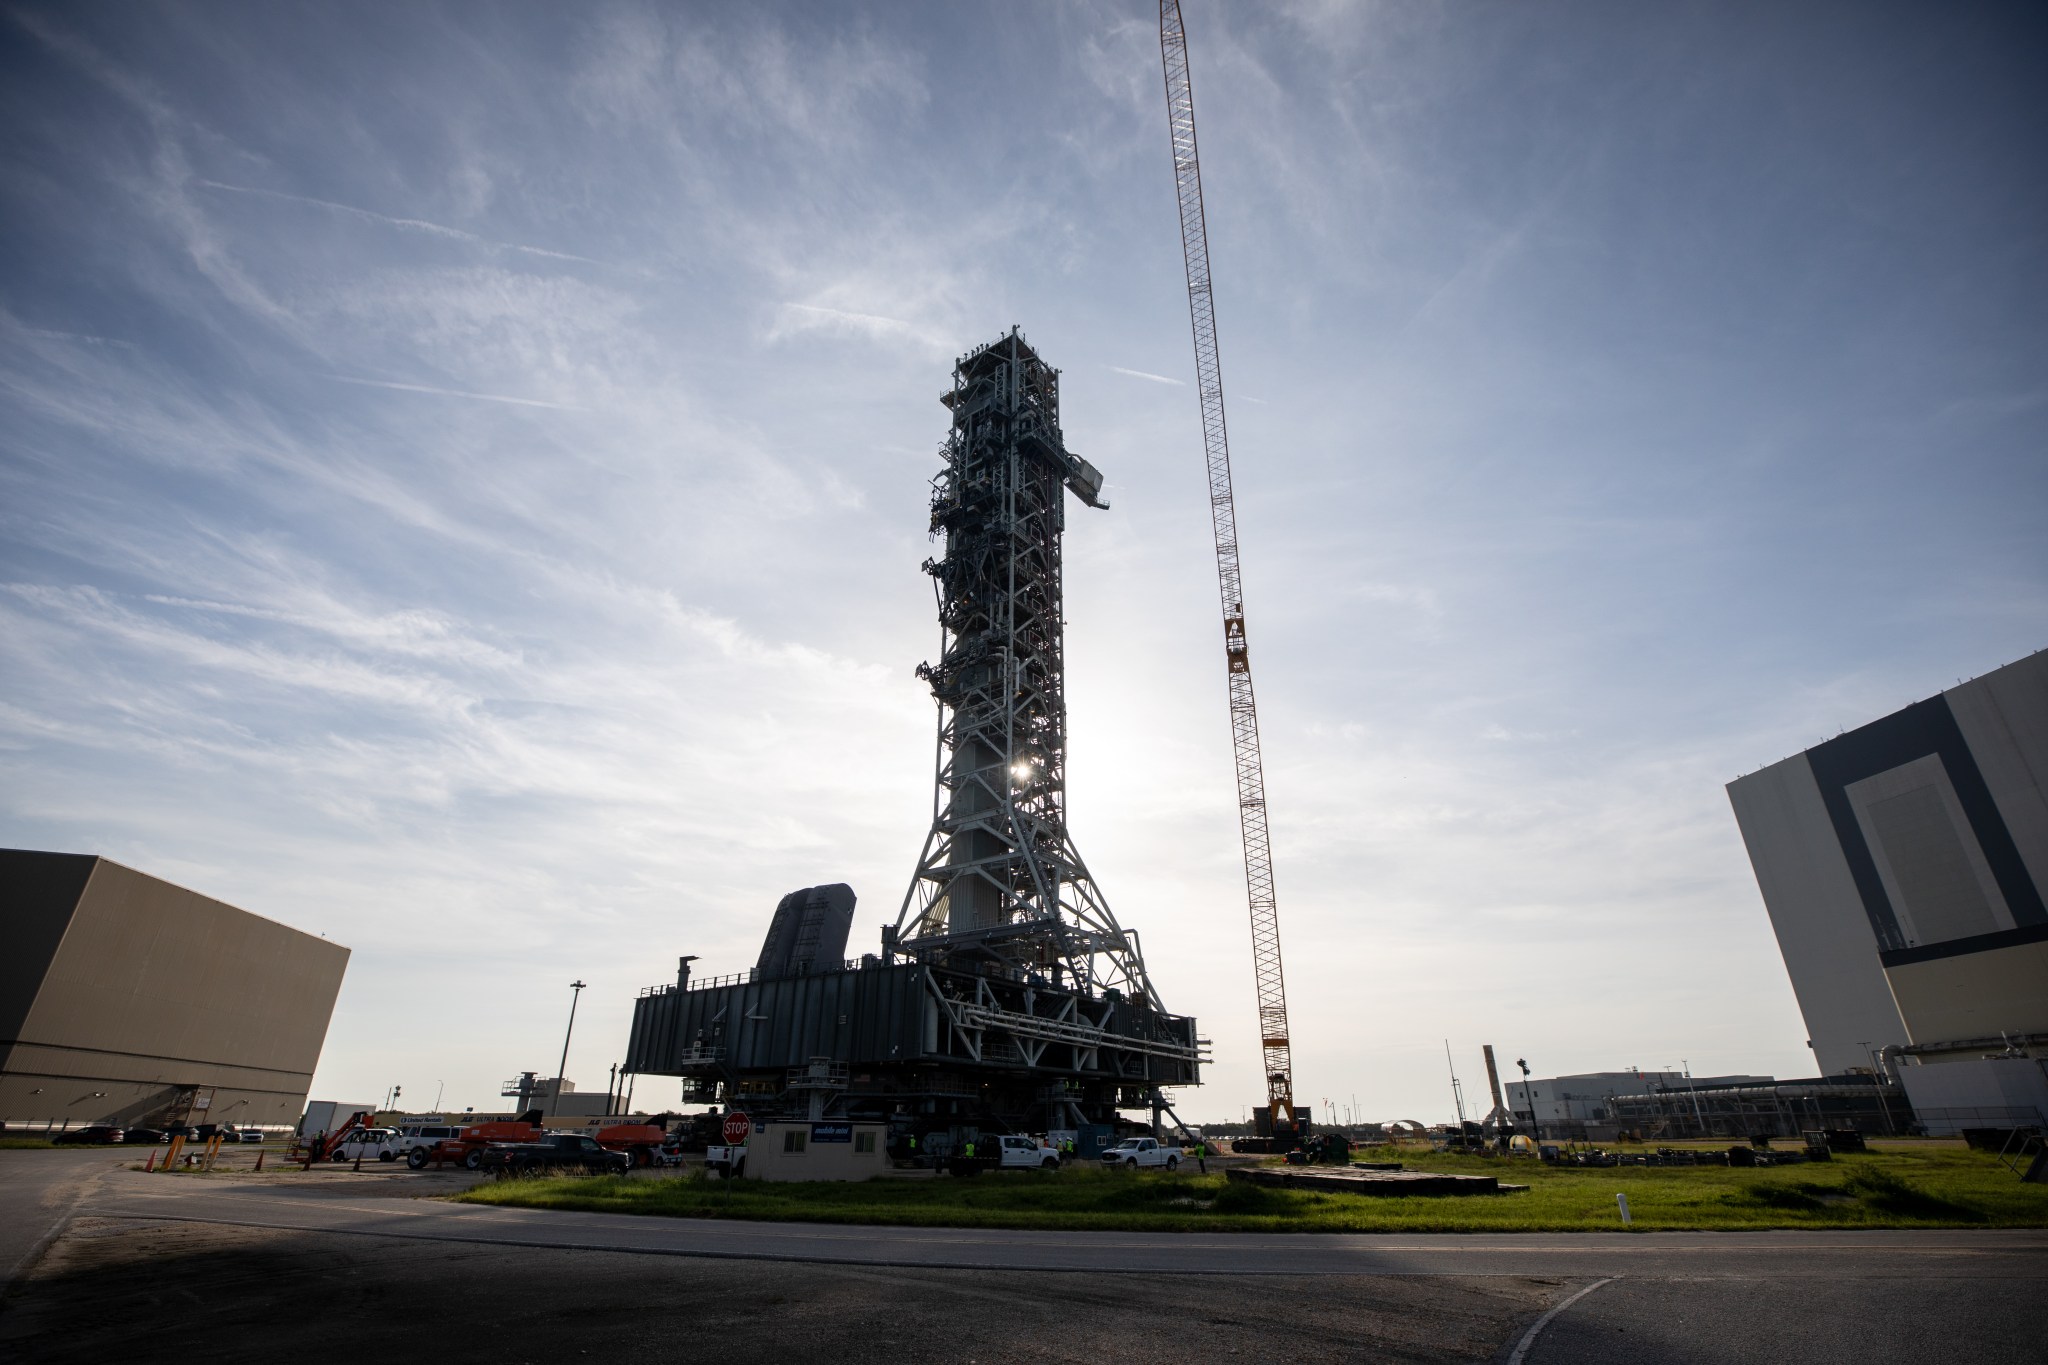 NASA's Space Launch System rocket Mobile Launcher moves to the launch pad at Kennedy Space Center.